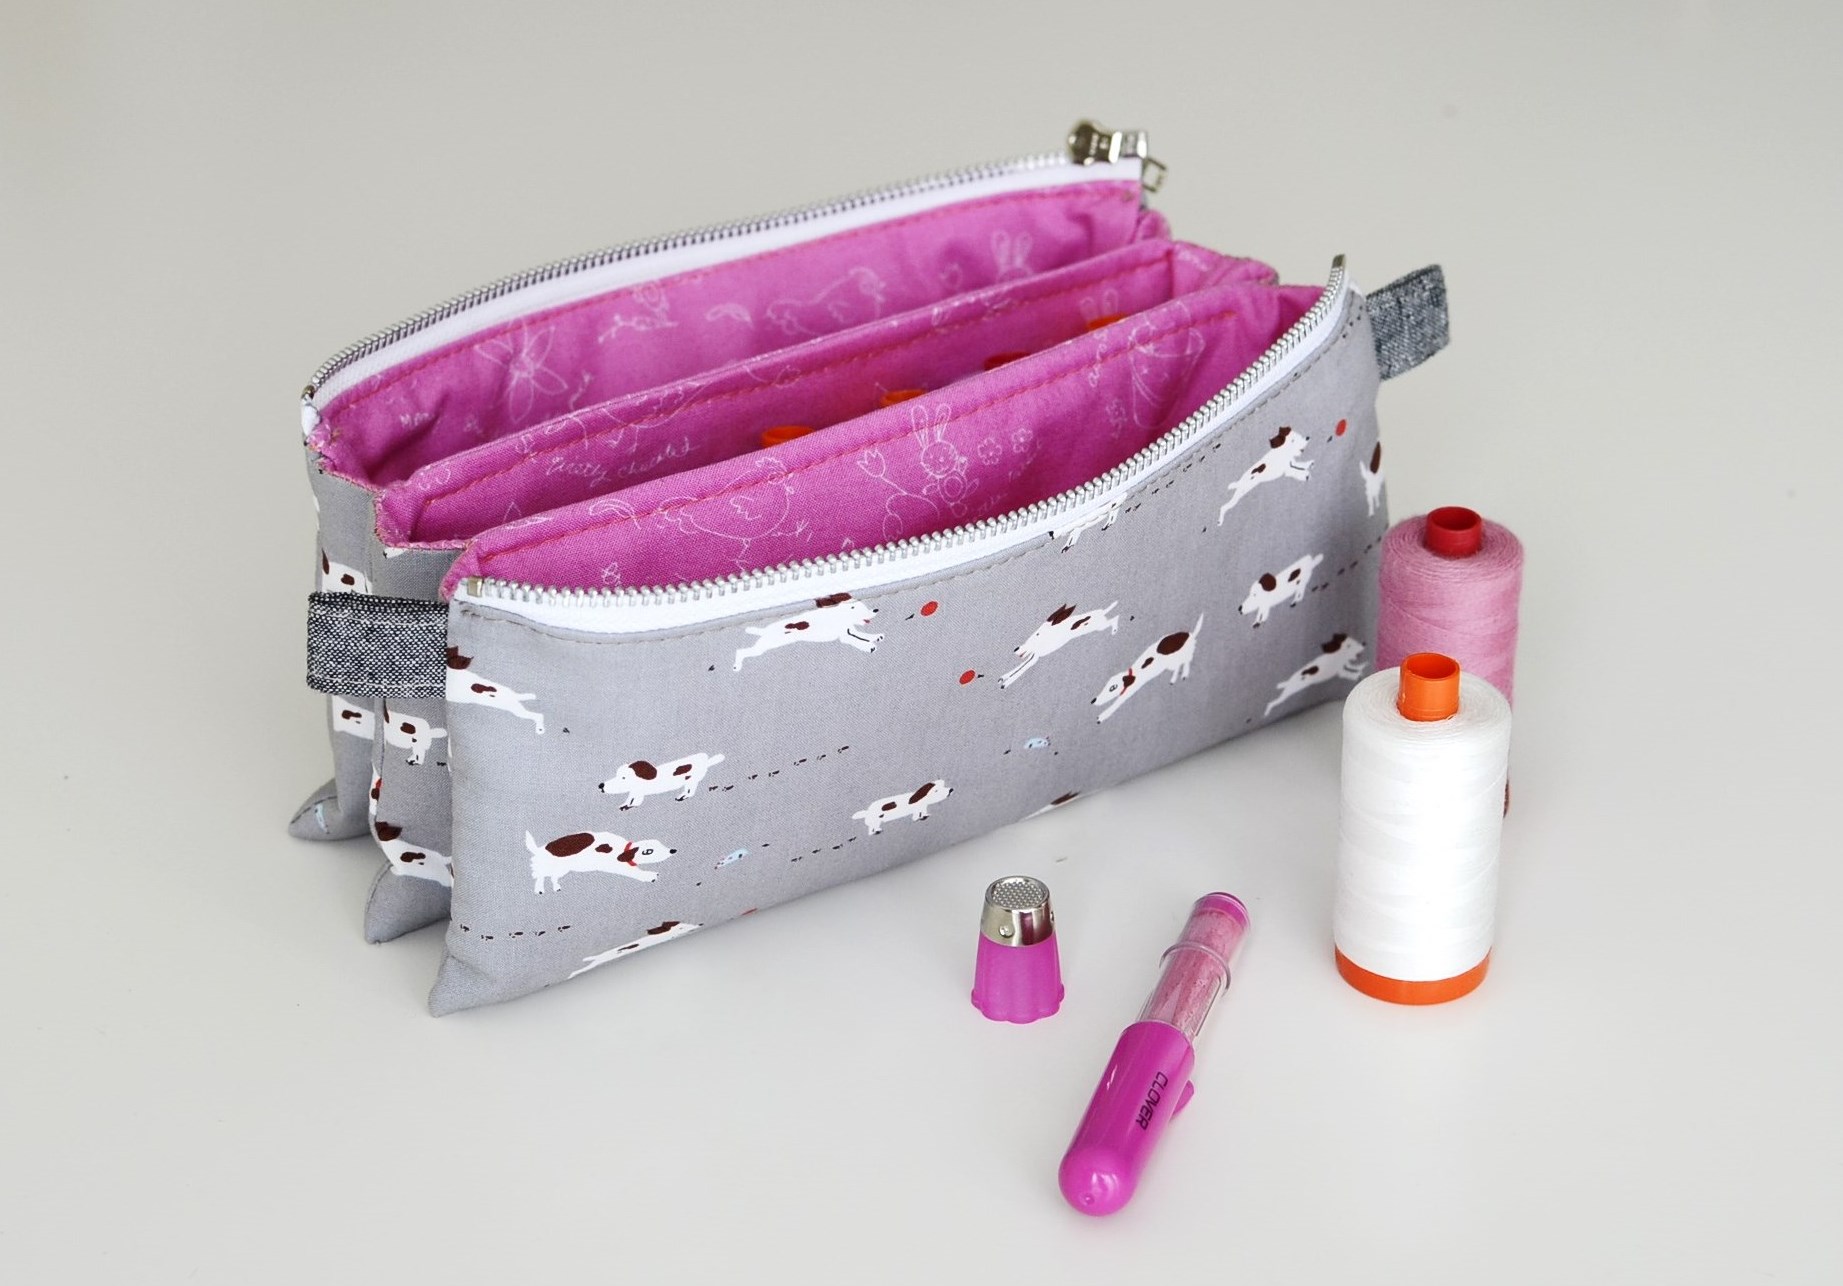 Pink Posy Pencil Pouch